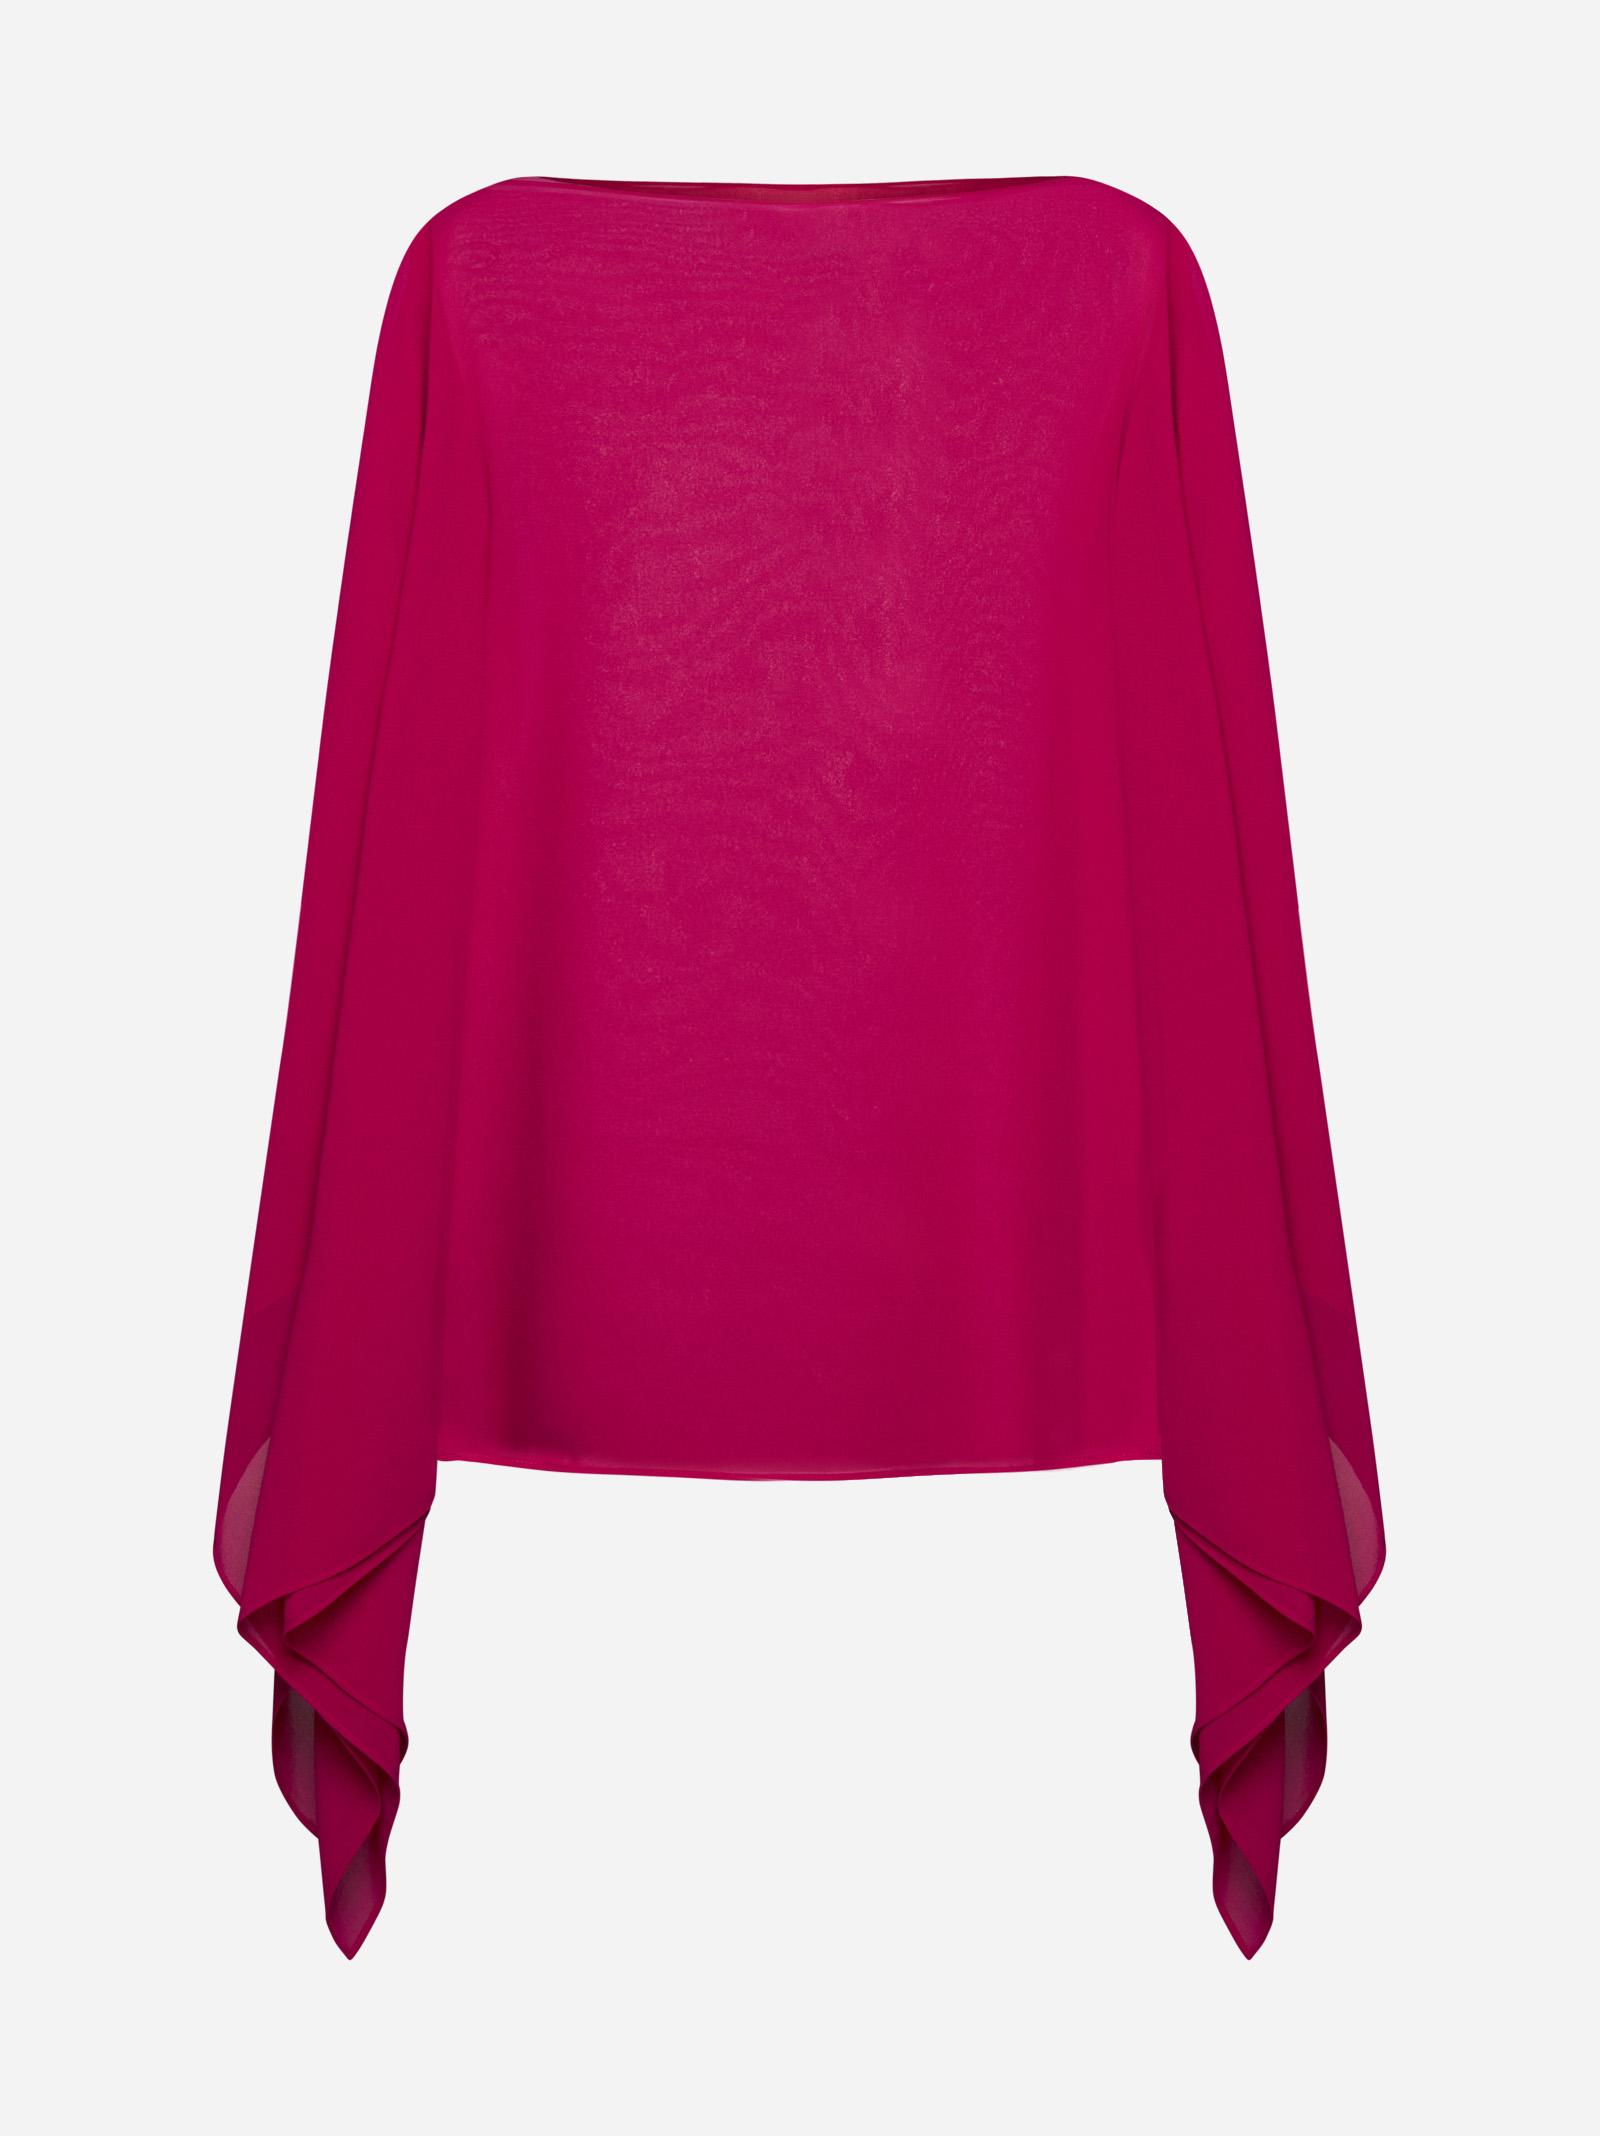 Blanca Vita Phiox Crepe Poncho in Red | Lyst